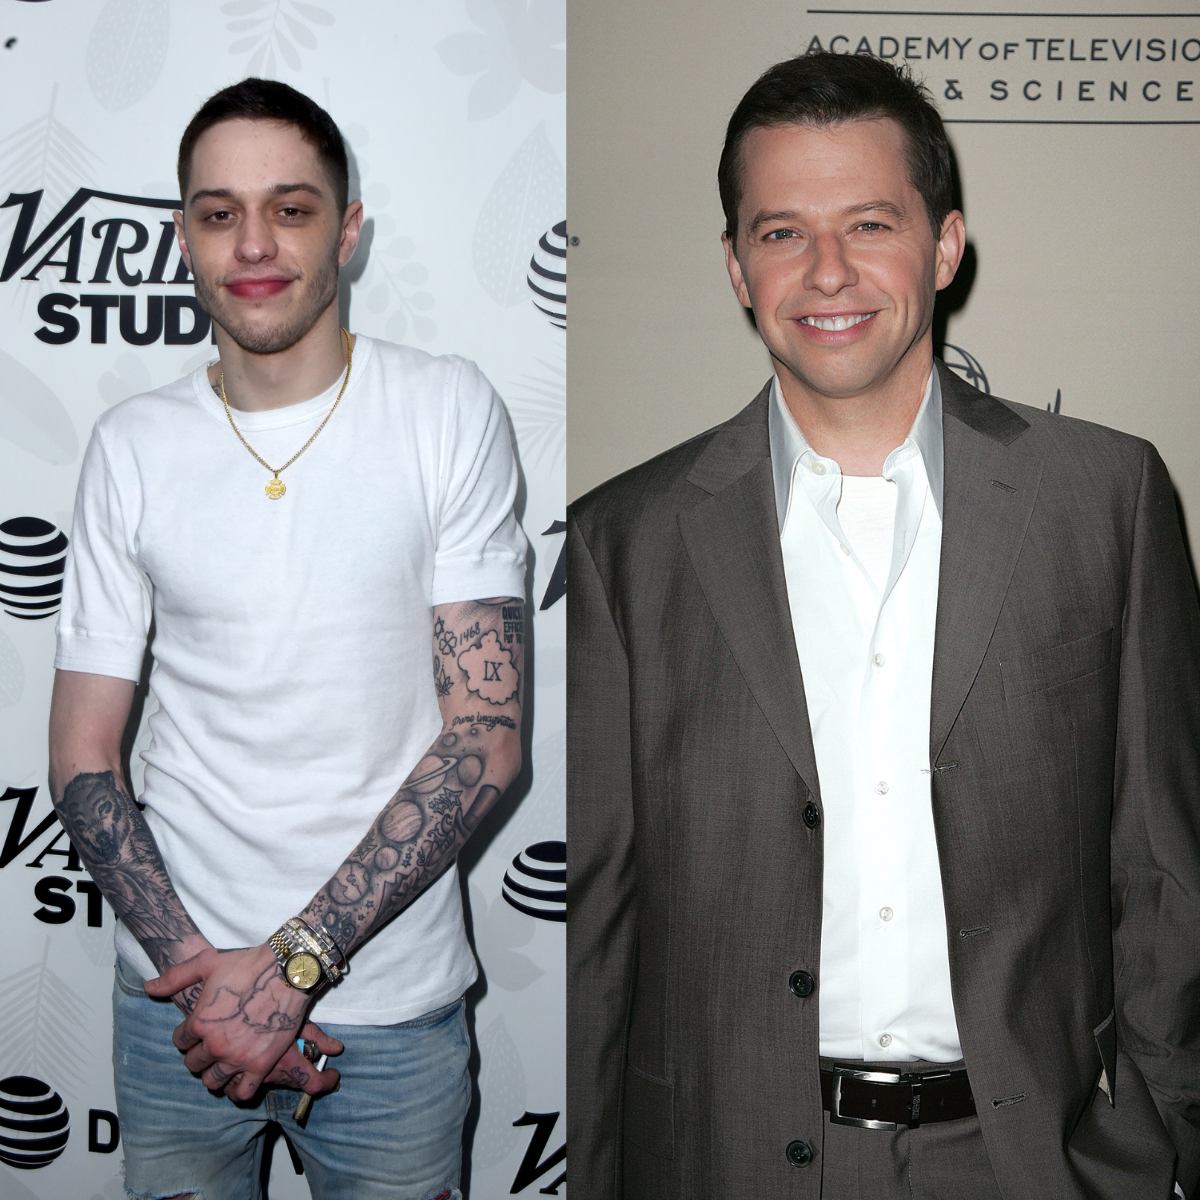 Are Pete Davidson and Jon Cryer related